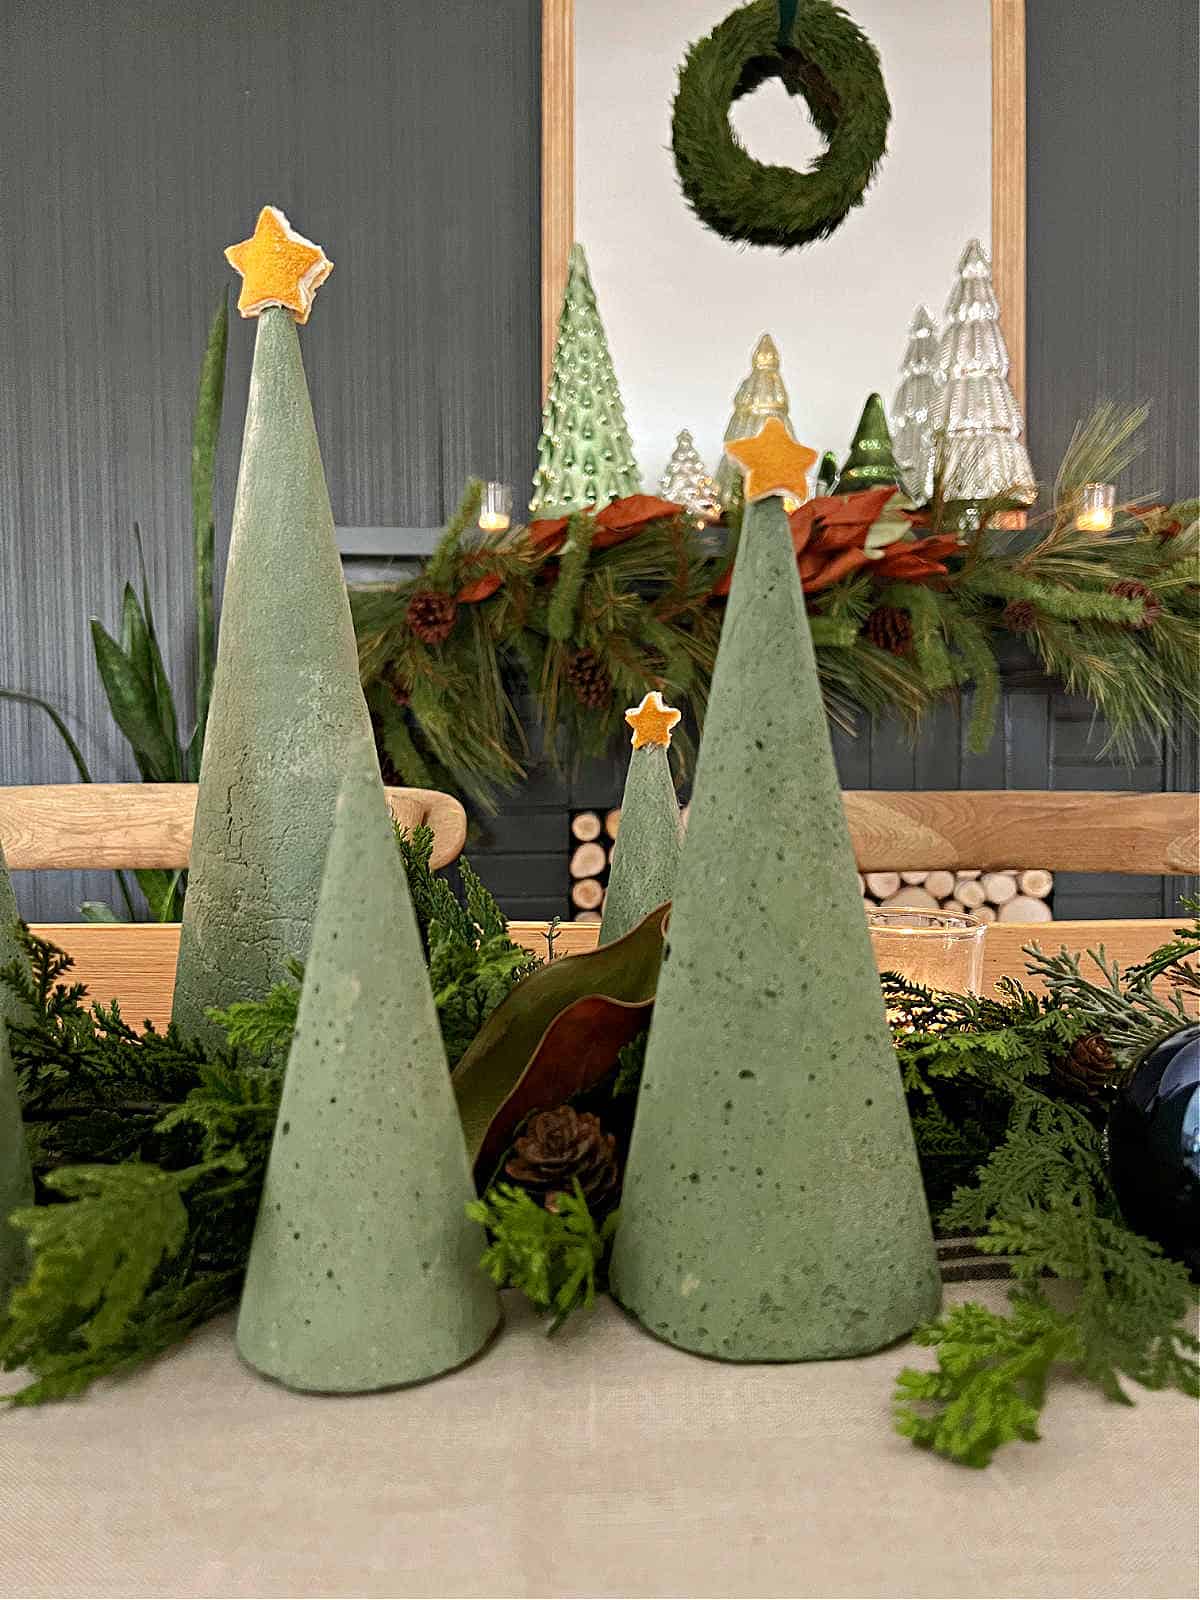 green dyed concrete Christmas trees on table